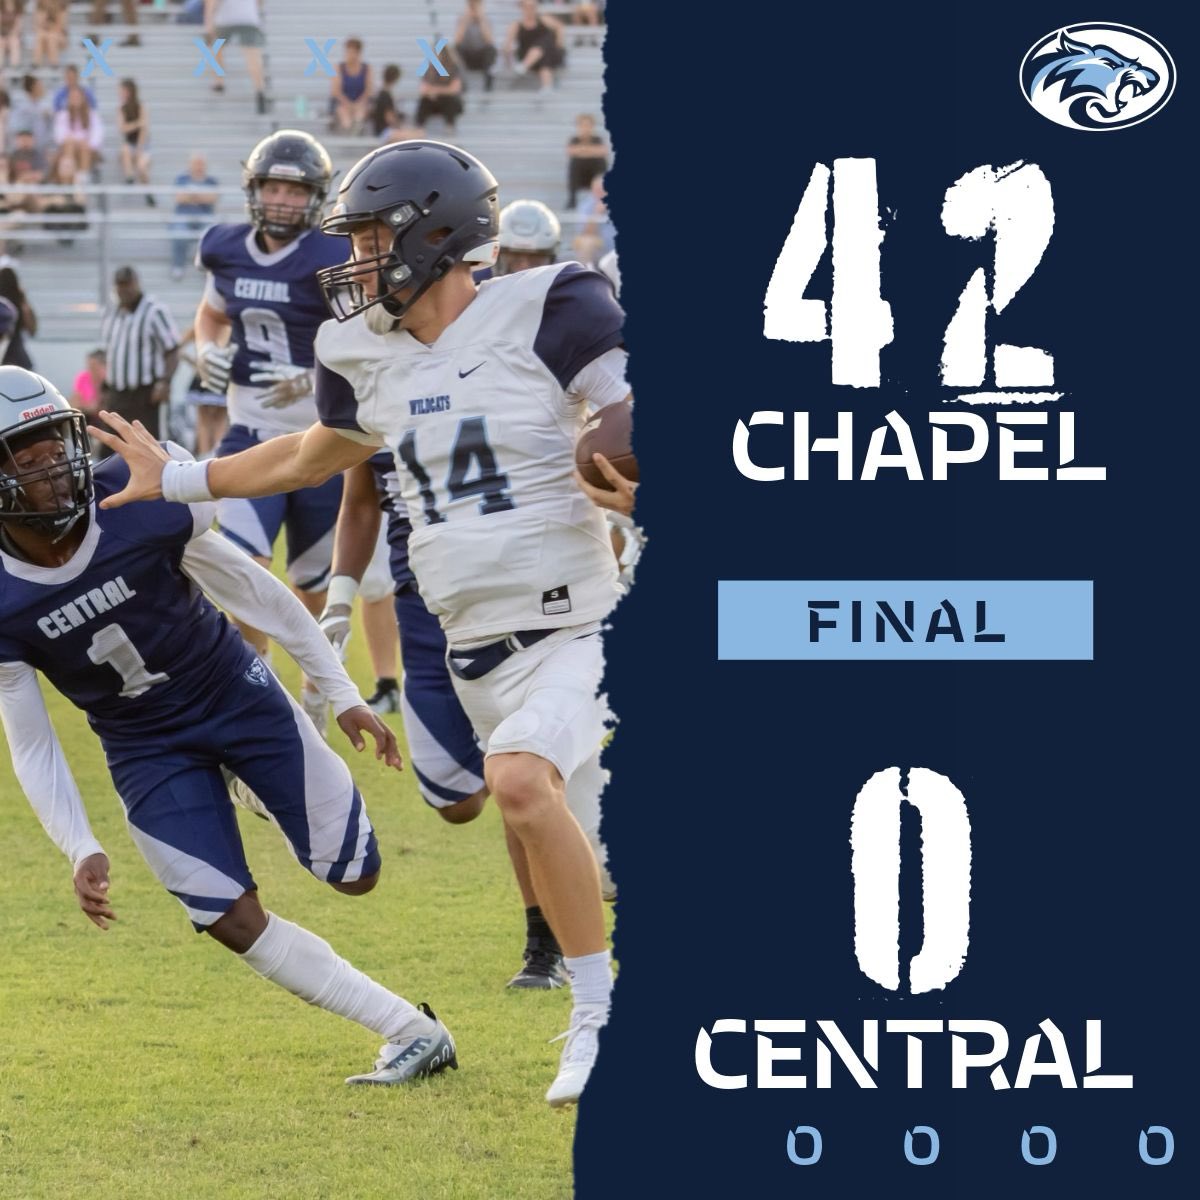 Another victory for the Blue and White in the spring game! 🏈💙🚾 Proud of the effort and execution from our Wildcats. _ #RaiseTheBar #WeAreChapel